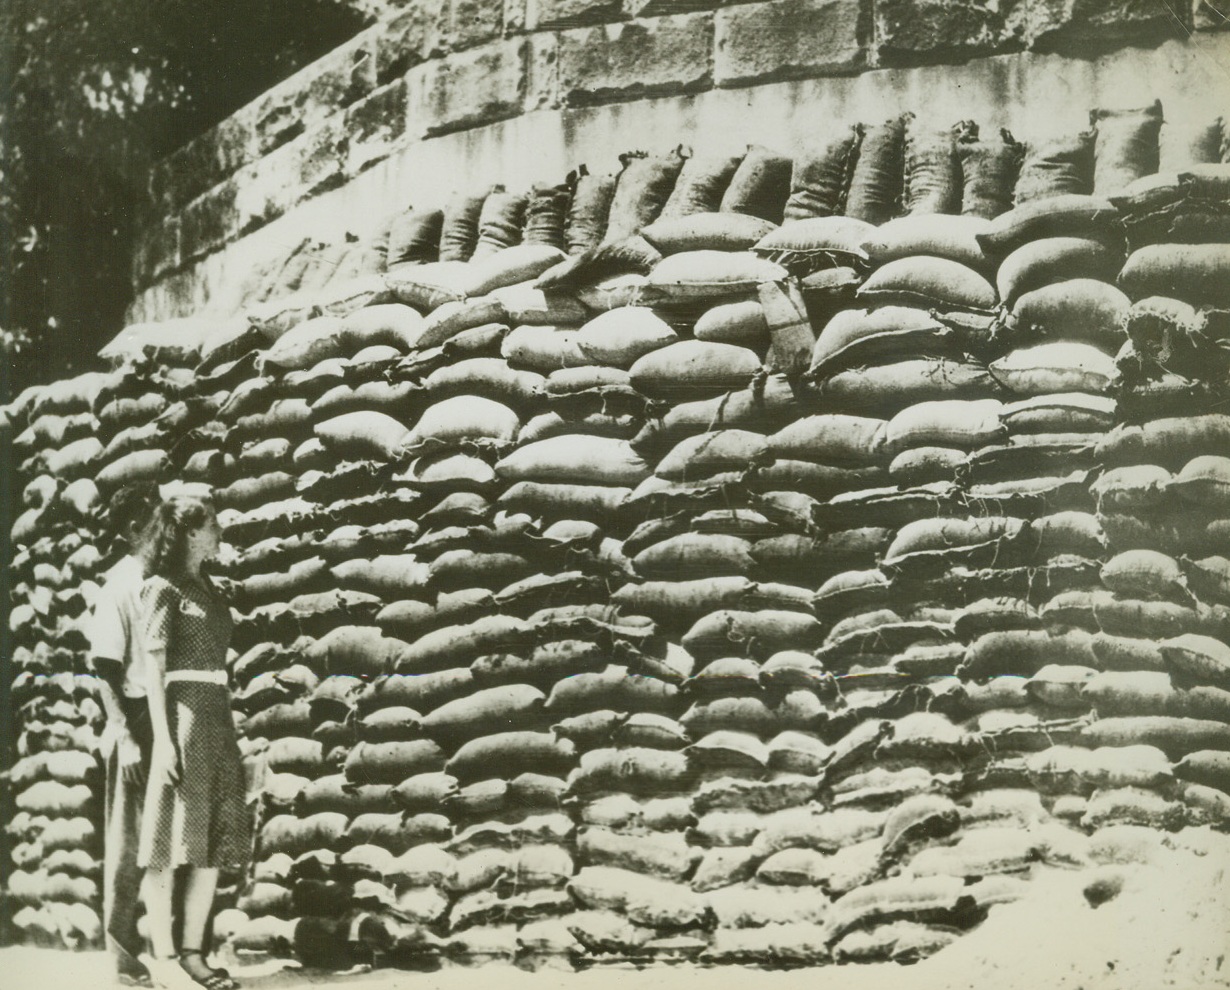 Reinforcement for an Already Strong Shelter, 3/13/1942. Sydney, Australia – On Sydney’s home front, preparations proceed apace for expected aerial invasion tries, with sandbags reinforcing already strong shelters.  ‘Professionals’ have erected this sandbag for around a shelter which will accommodate 50 people in its two rooms.  The cost was 100 pounds, a little less than $500.  This is just one of the many fortified homes and offices in Sydney. Credit line (ACME);